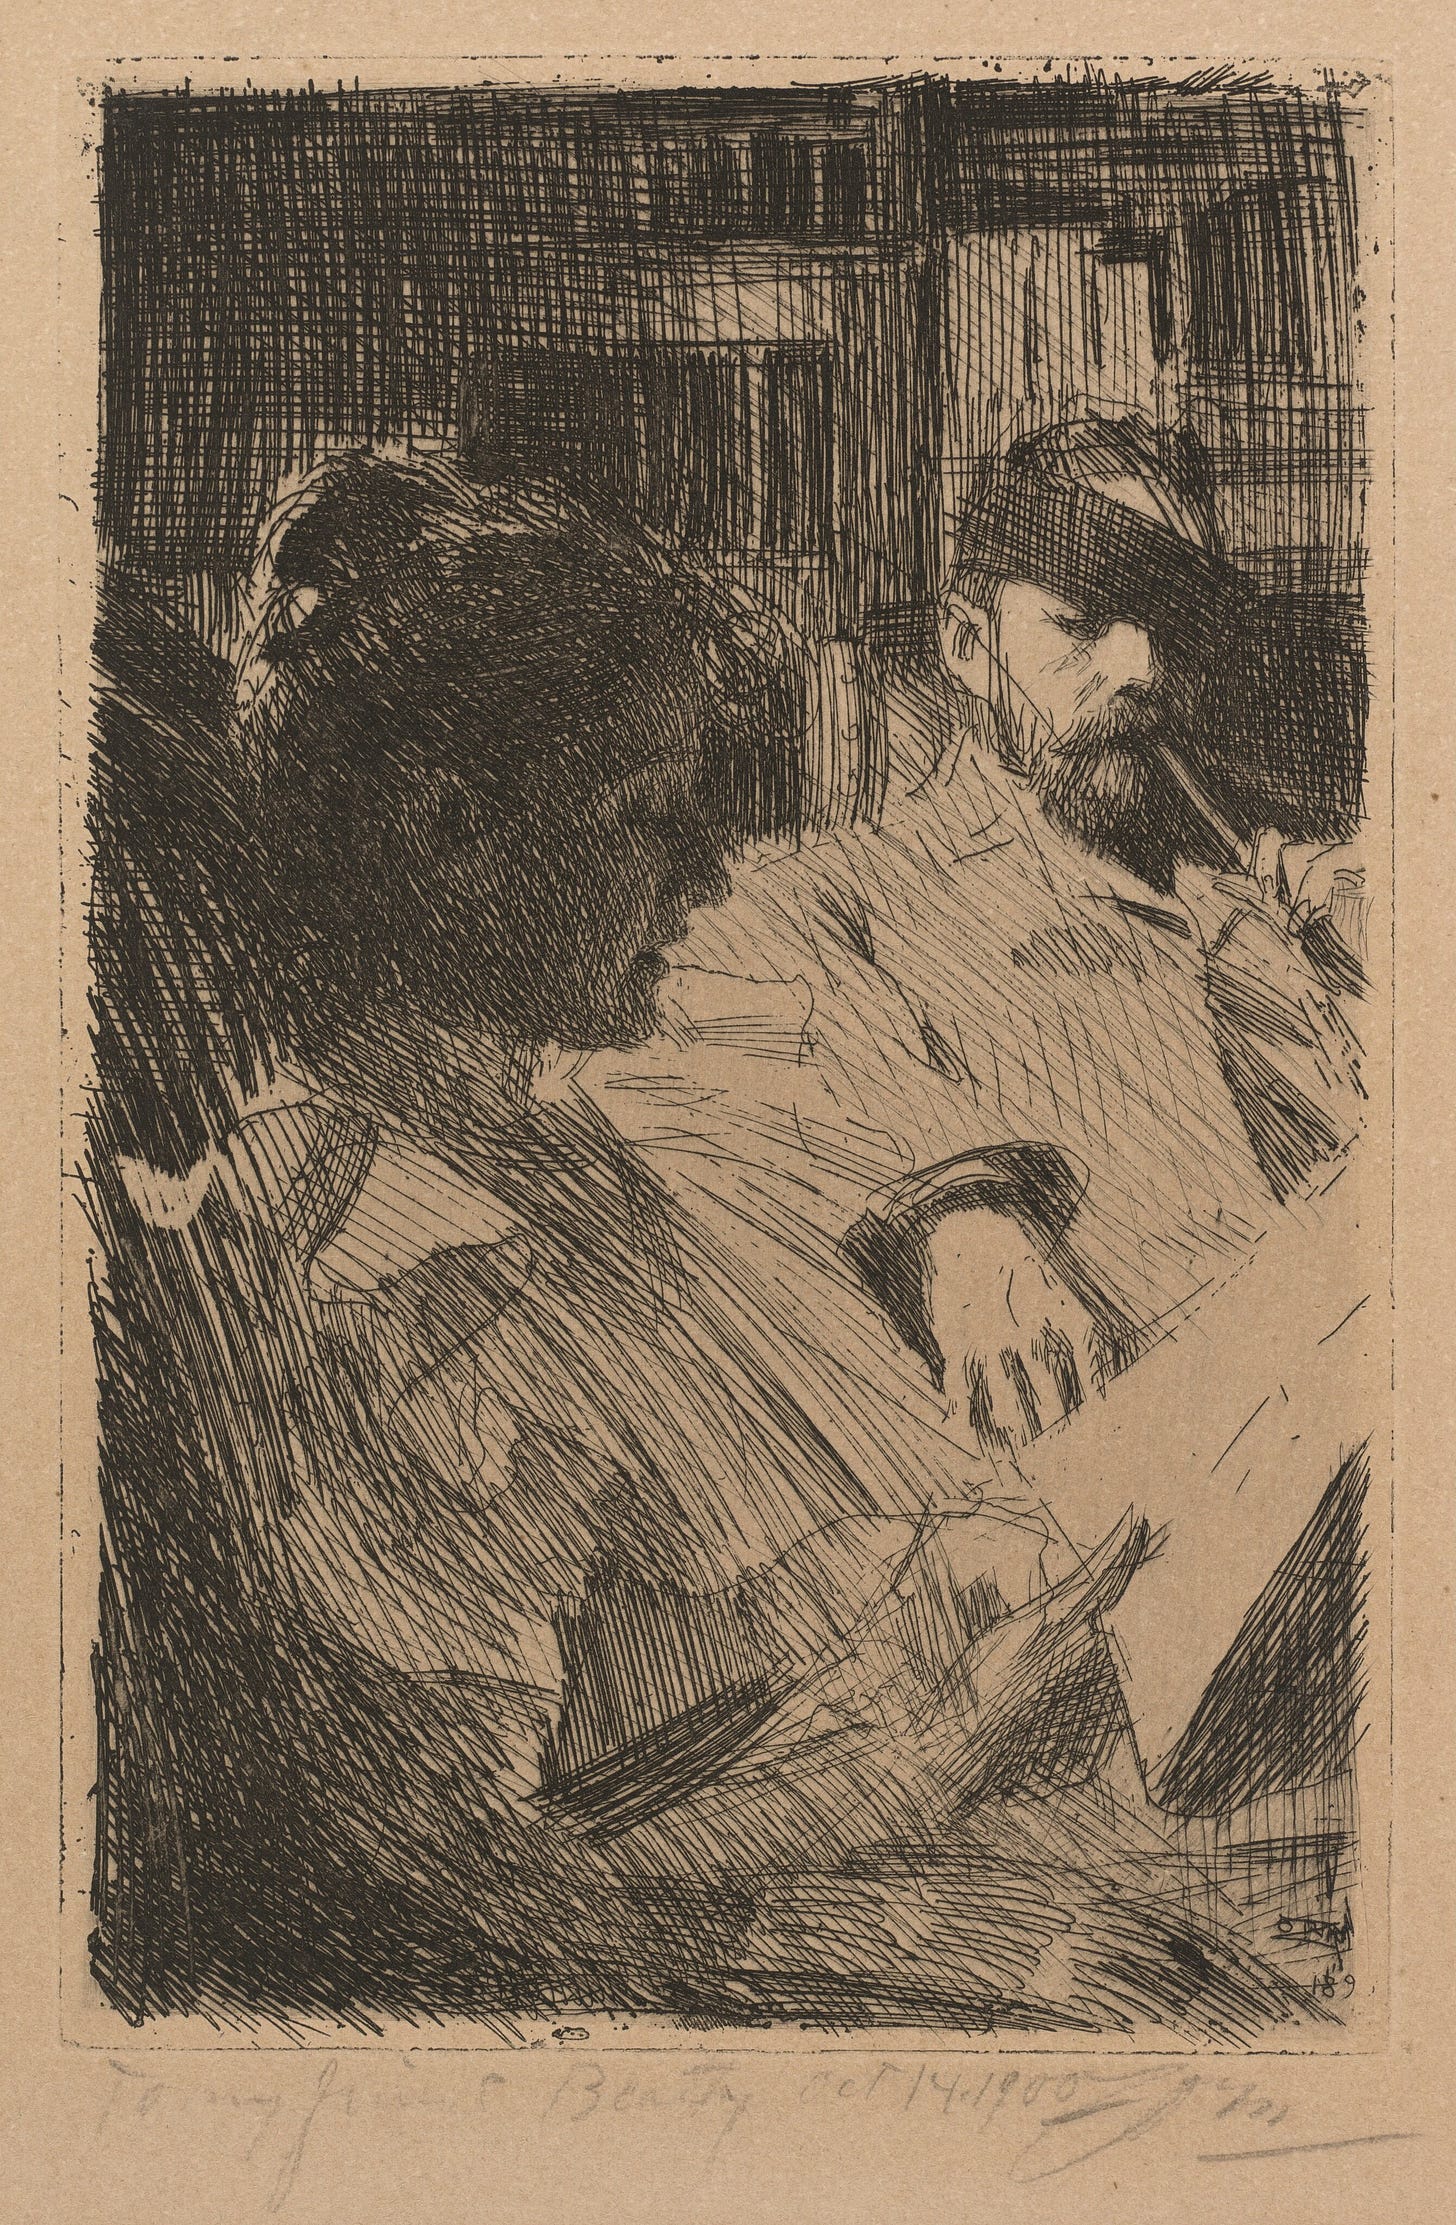 1893 sketch of a woman reading while a man listens across the room